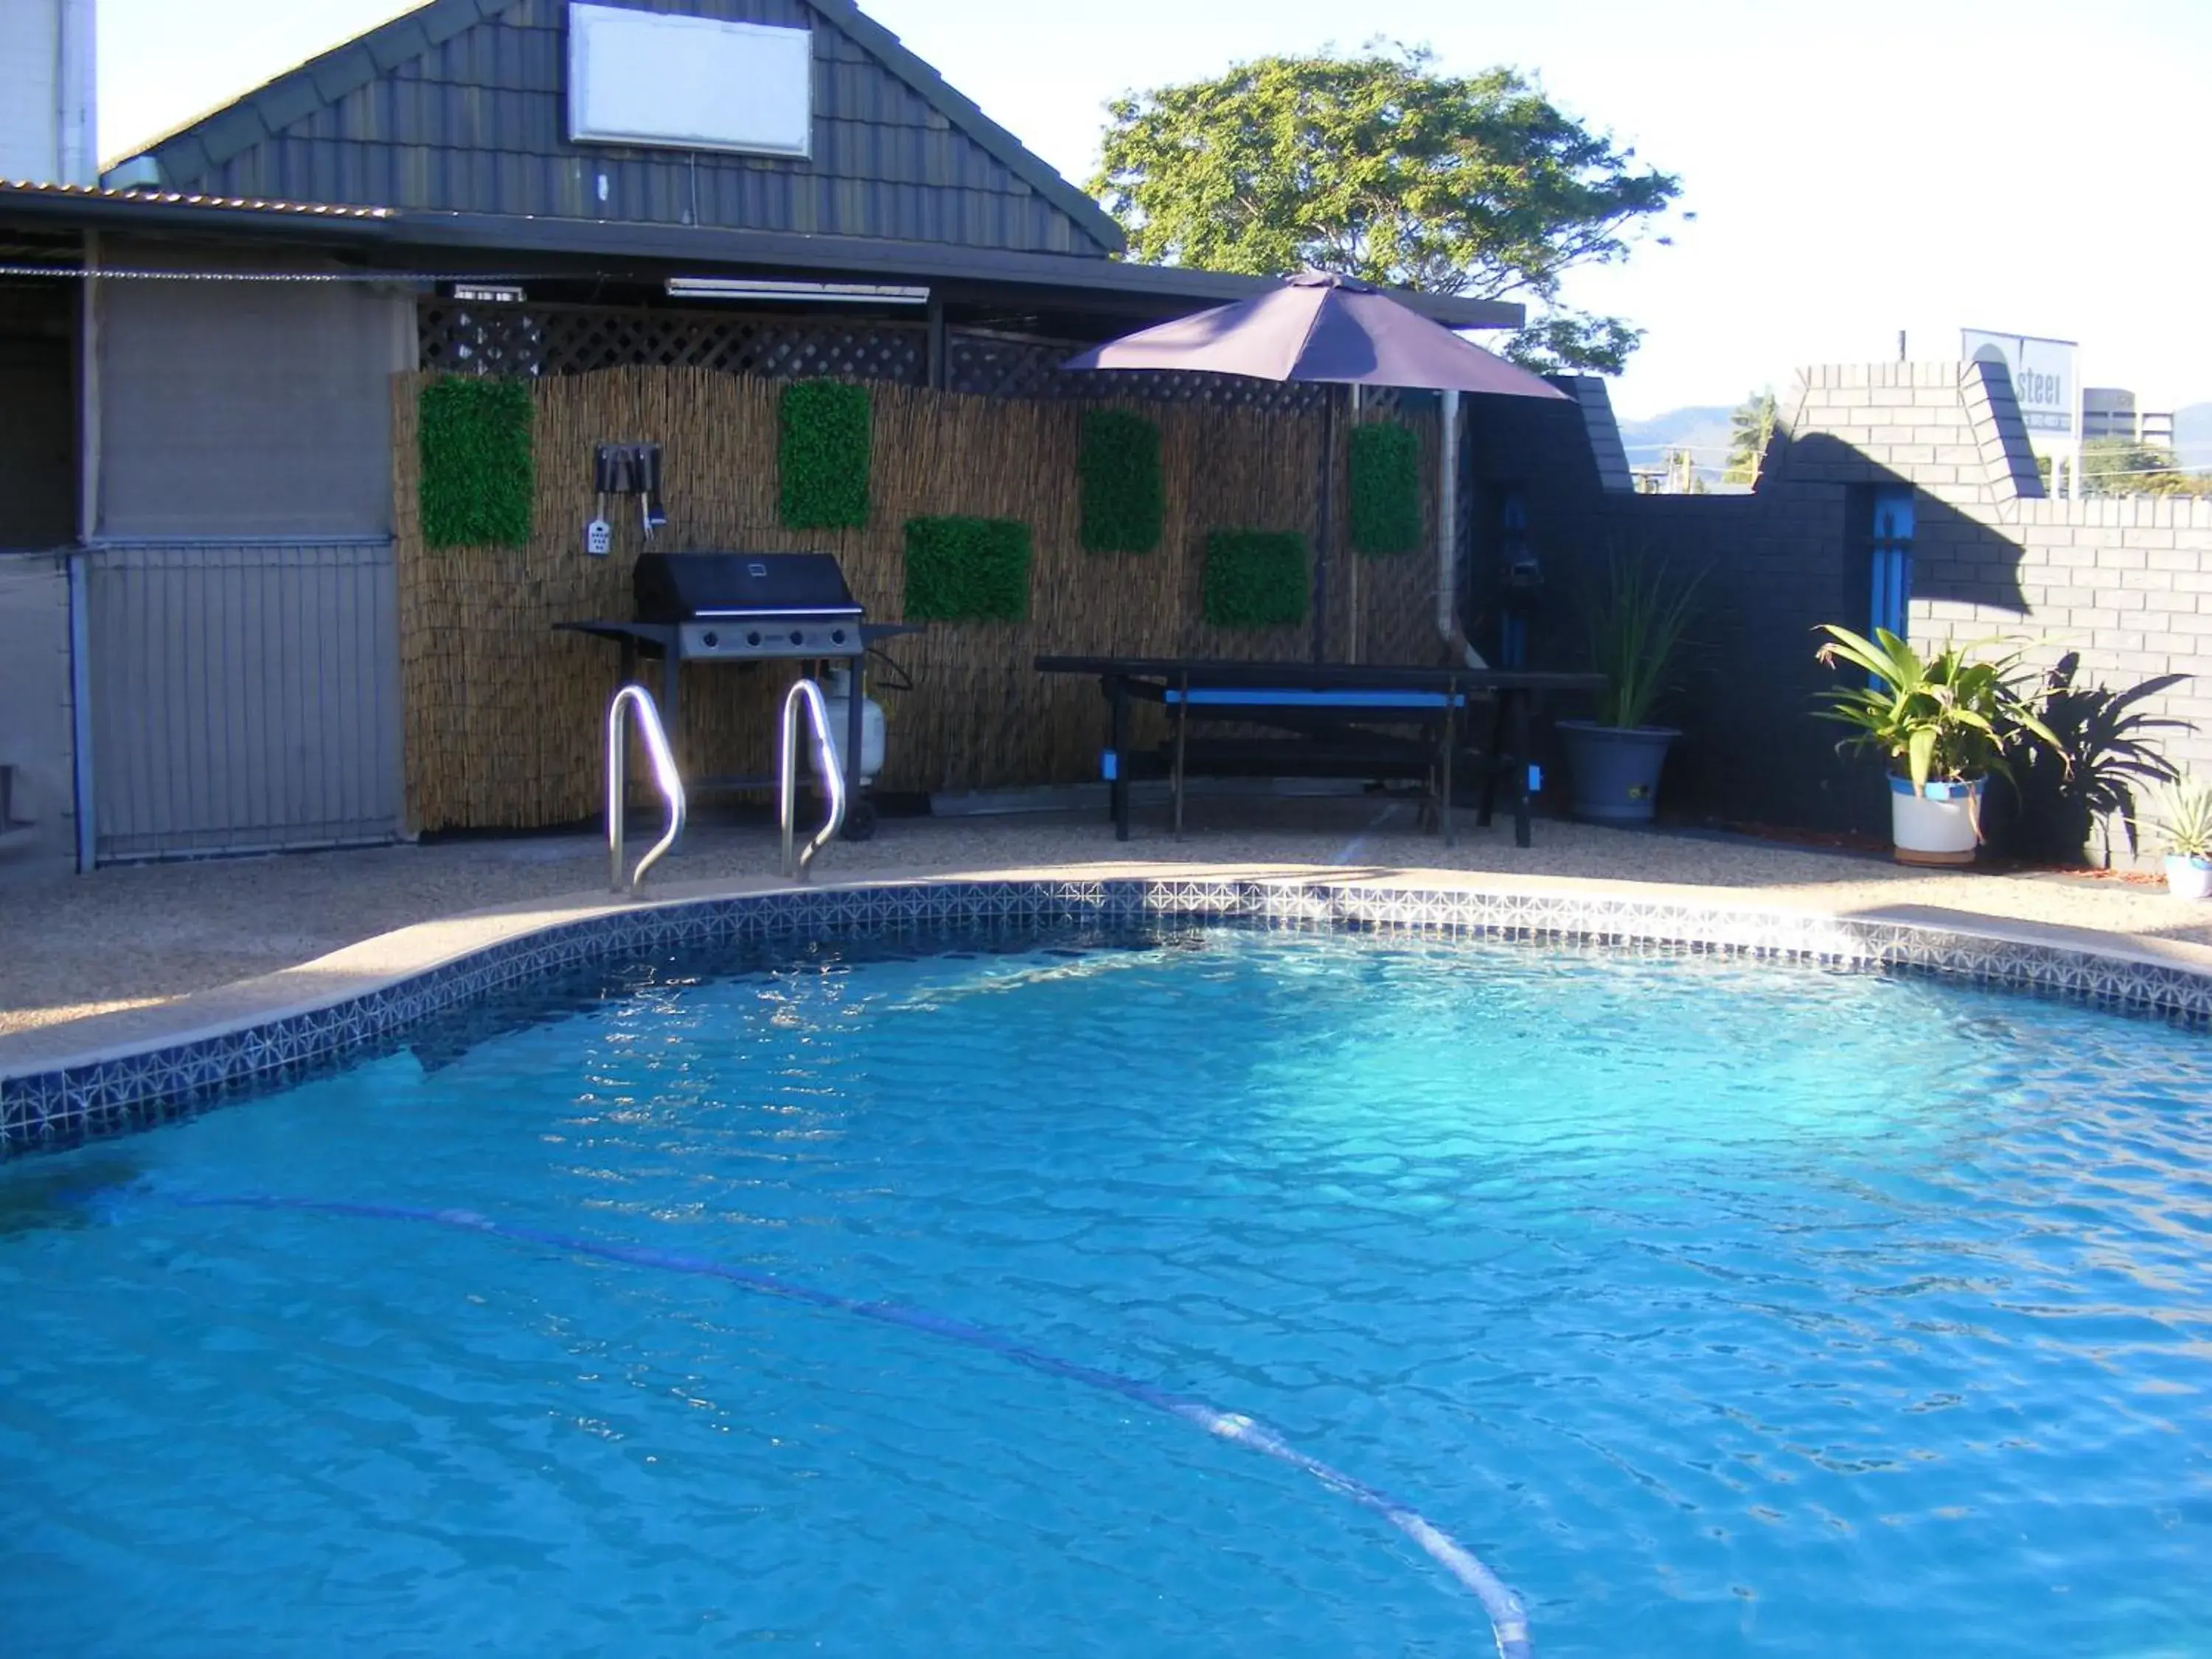 Property building, Swimming Pool in Motel Lodge